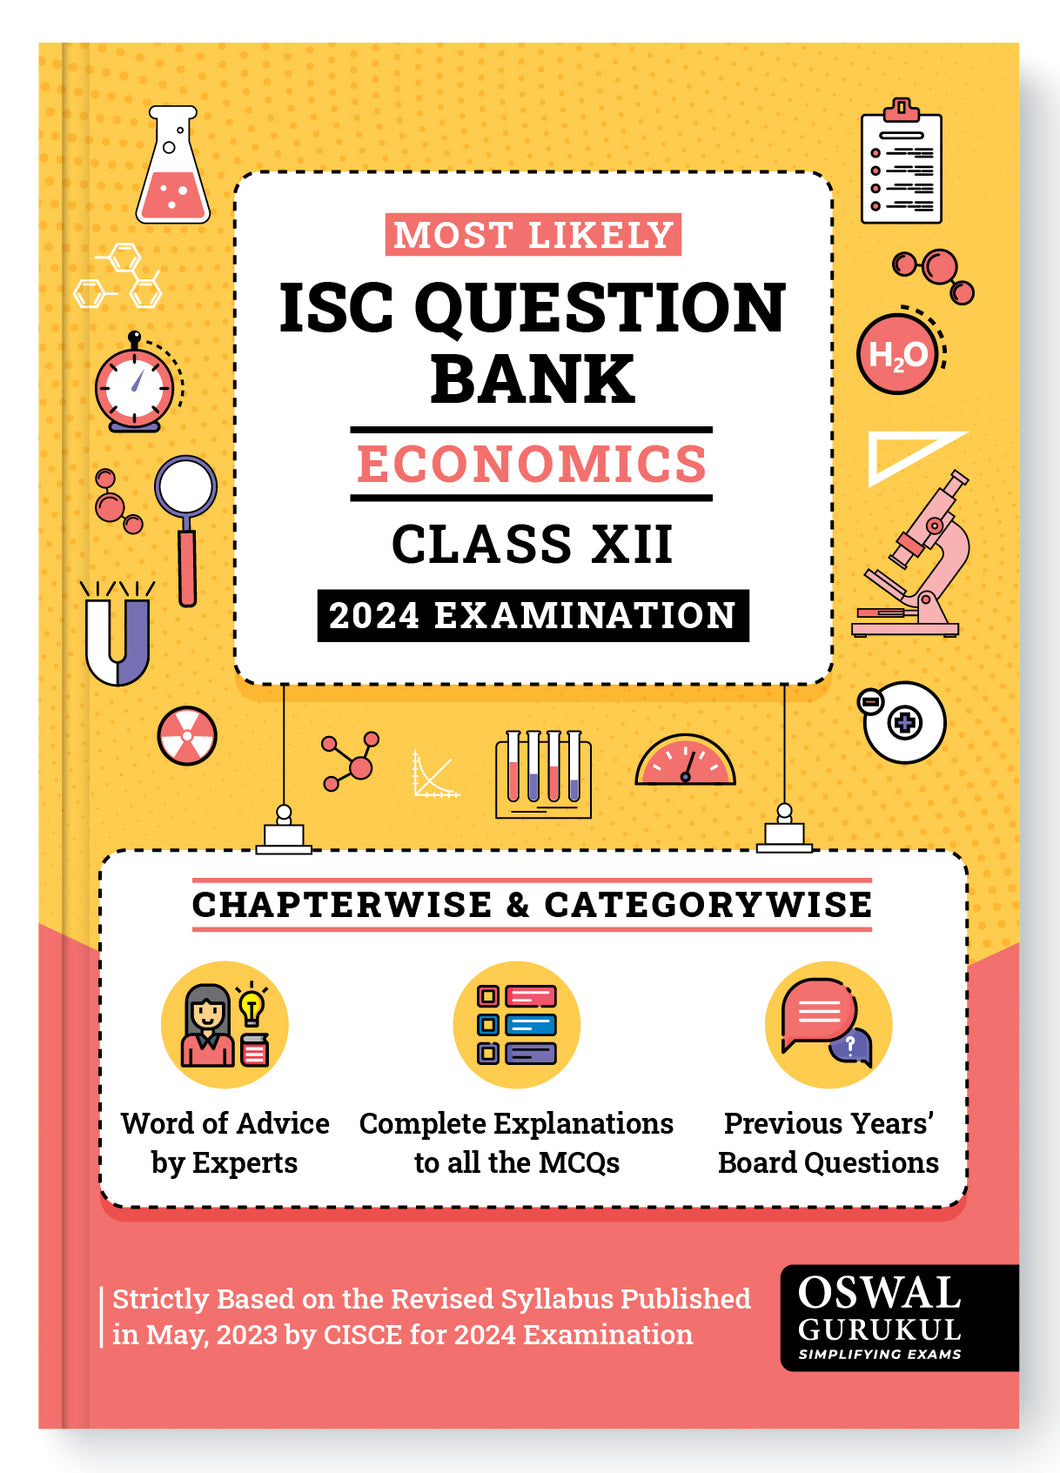 Oswal - Gurukul Economics Most Likely Question Bank : ISC Class 12 for 2024 Exam